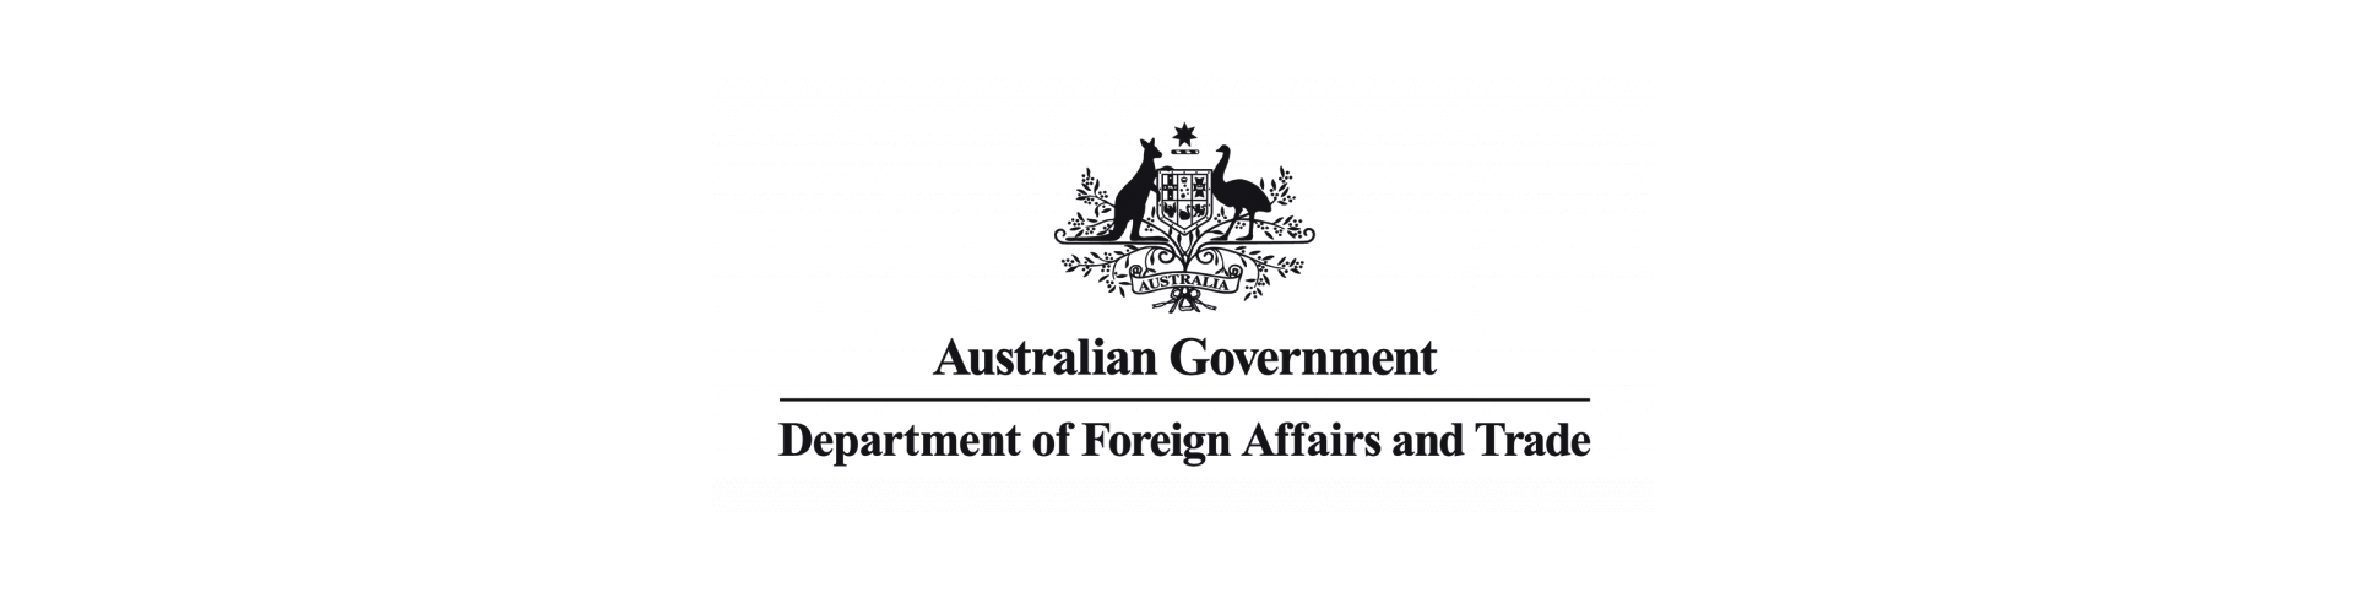 Australian Government - Department of Foreign Affairs and Trade